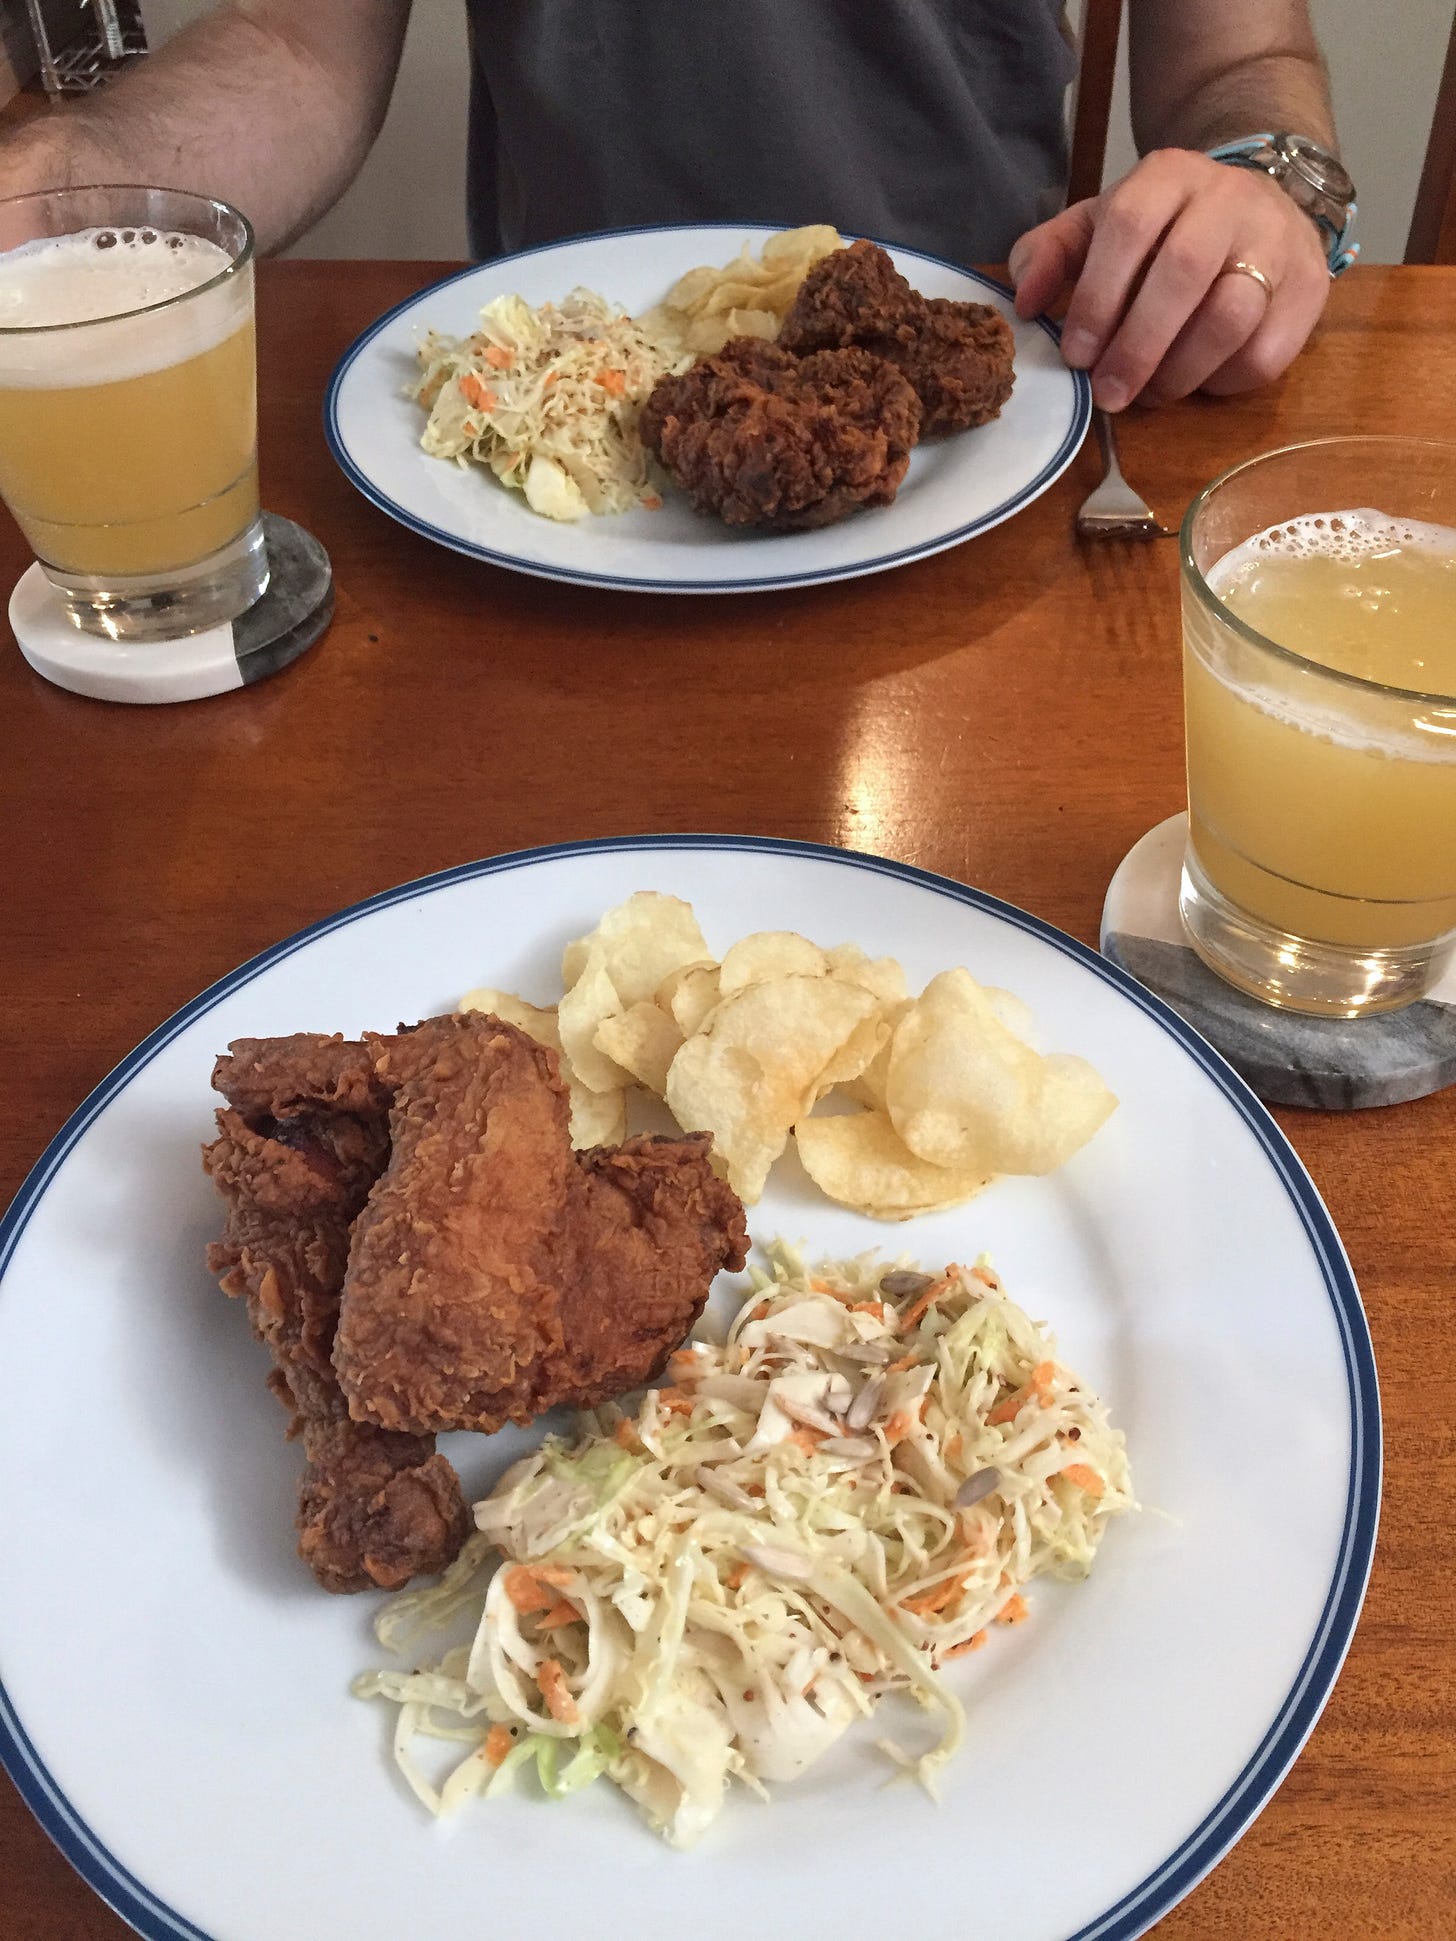 Two white dinner plates, each with two pieces of fried chicken, a small pile of kettle chips, and some coleslaw. Next to the plates are glasses of IPA on coasters.